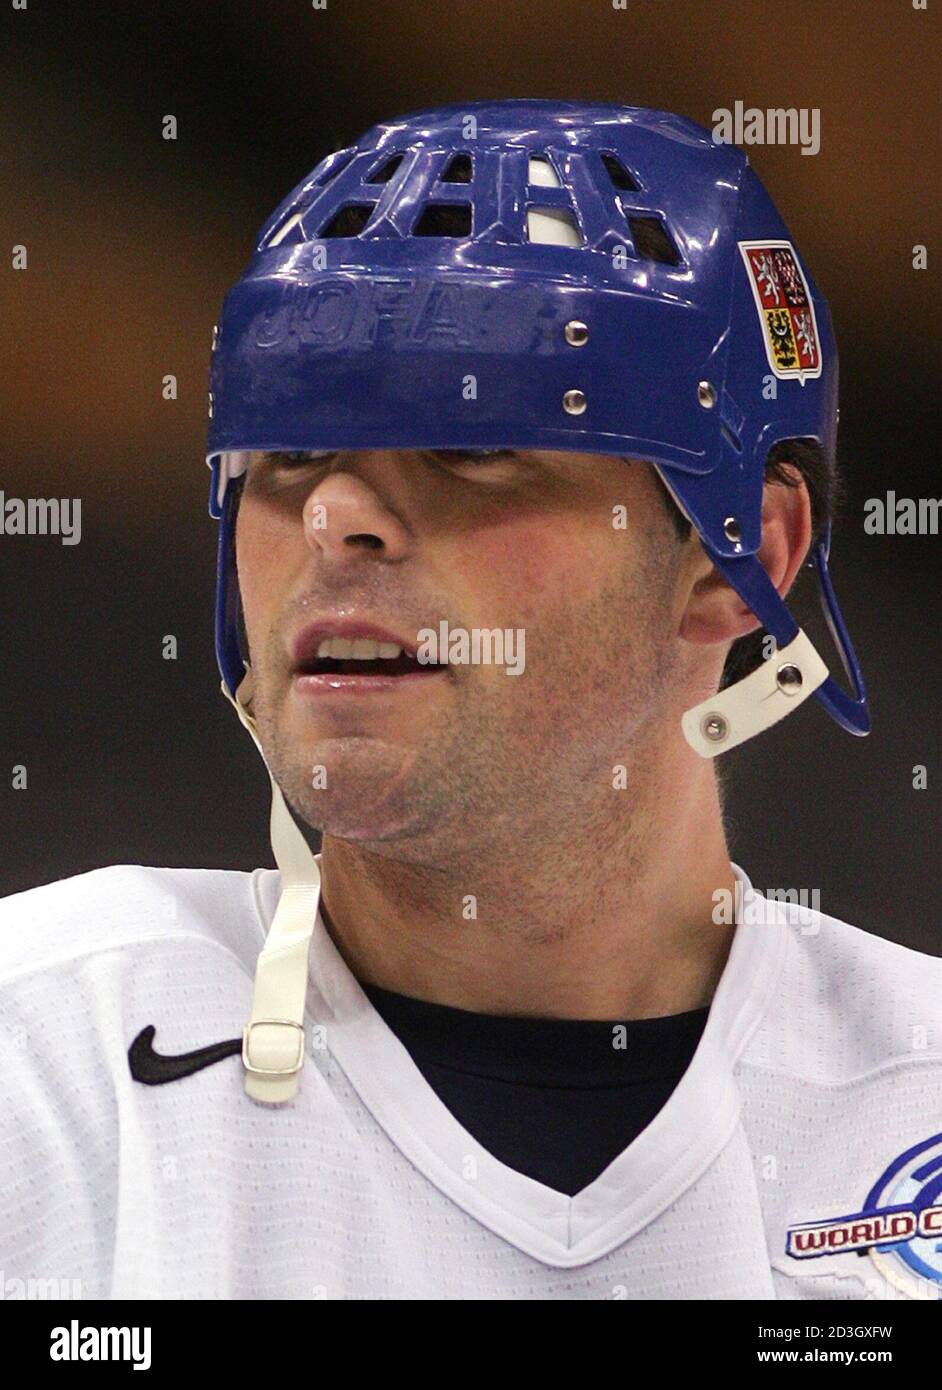 Czech Republic's Jaromir Jagr's helmet slips over his eyes during his  team's practice for the 2004 World Cup of Hockey in Toronto, September 10,  2004. Jagr is skating for the first time